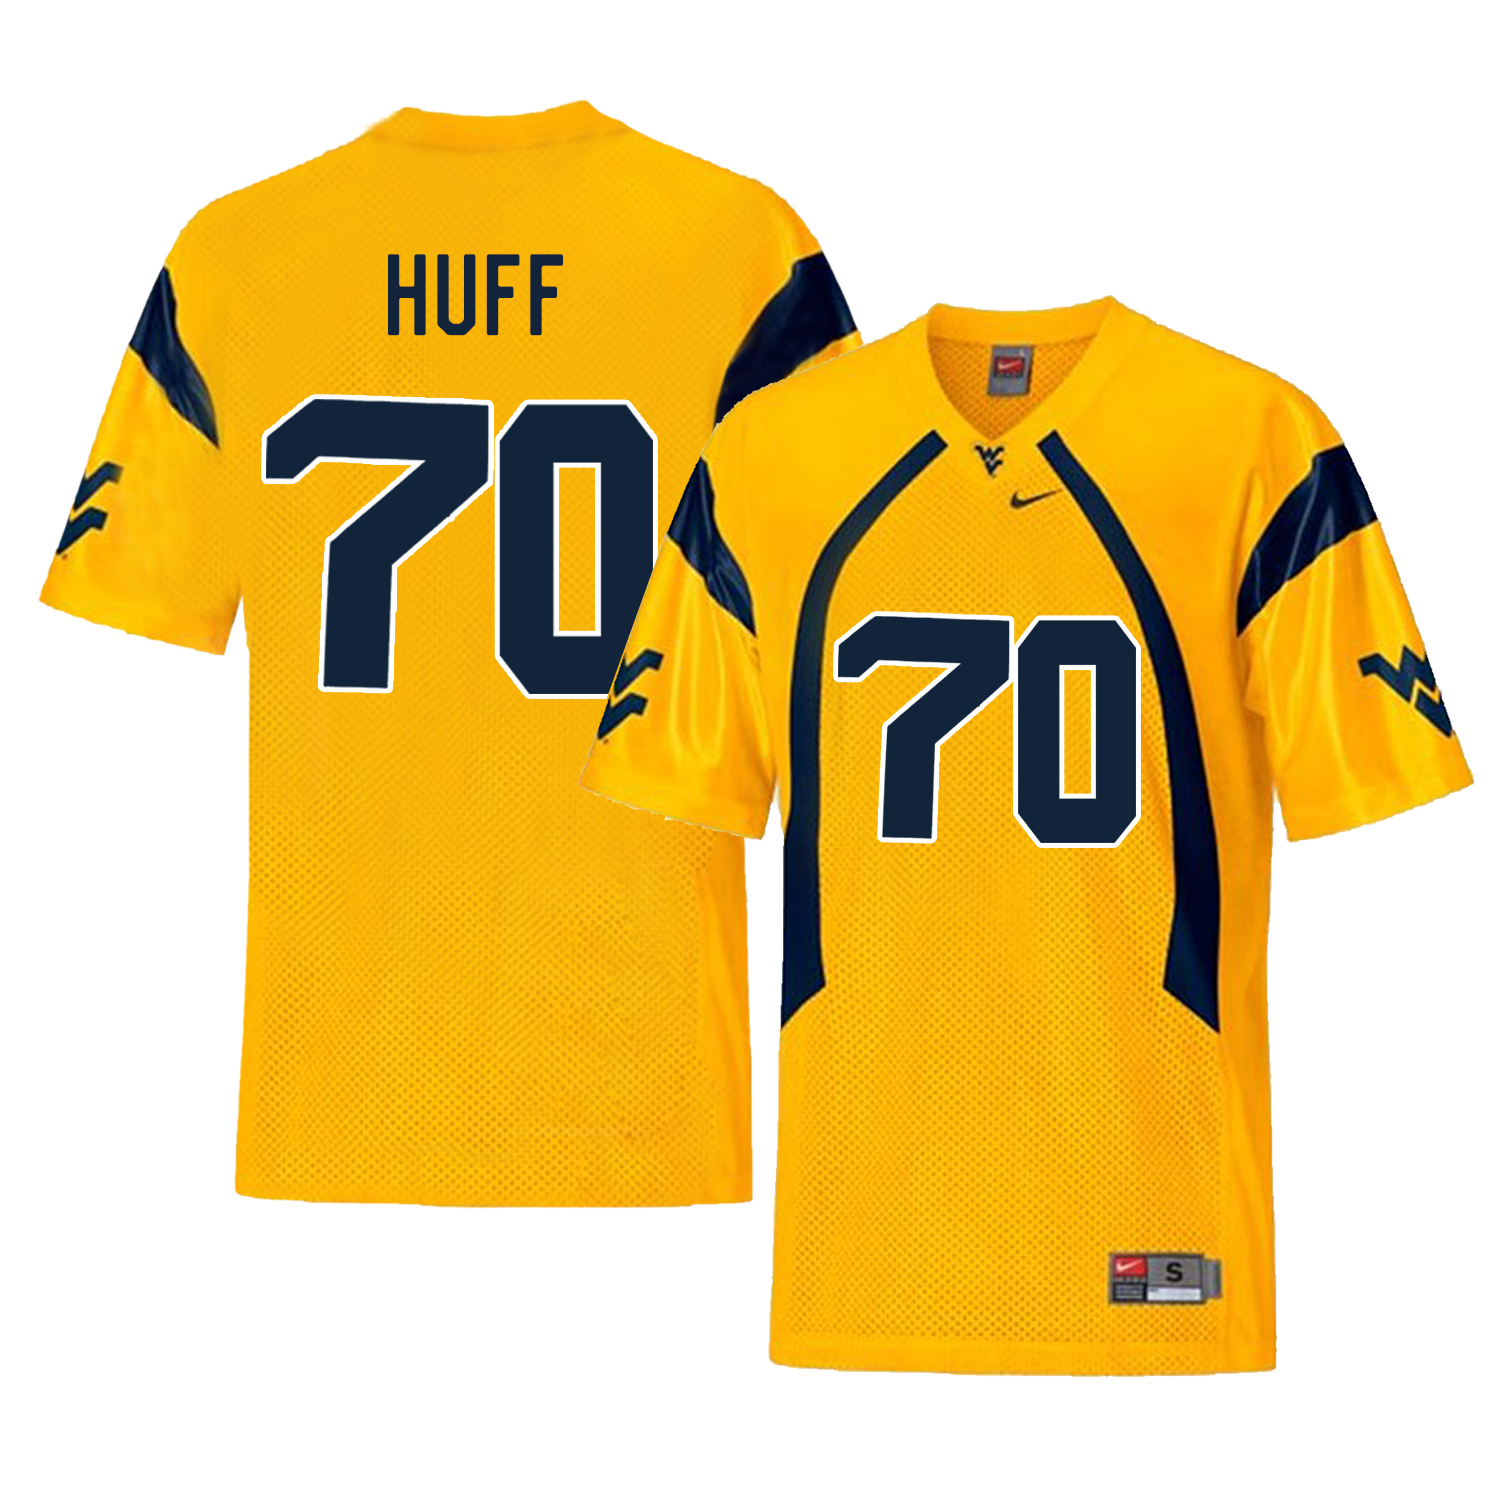 West Virginia Mountaineers 70 Sam Huff Gold College Football Jersey